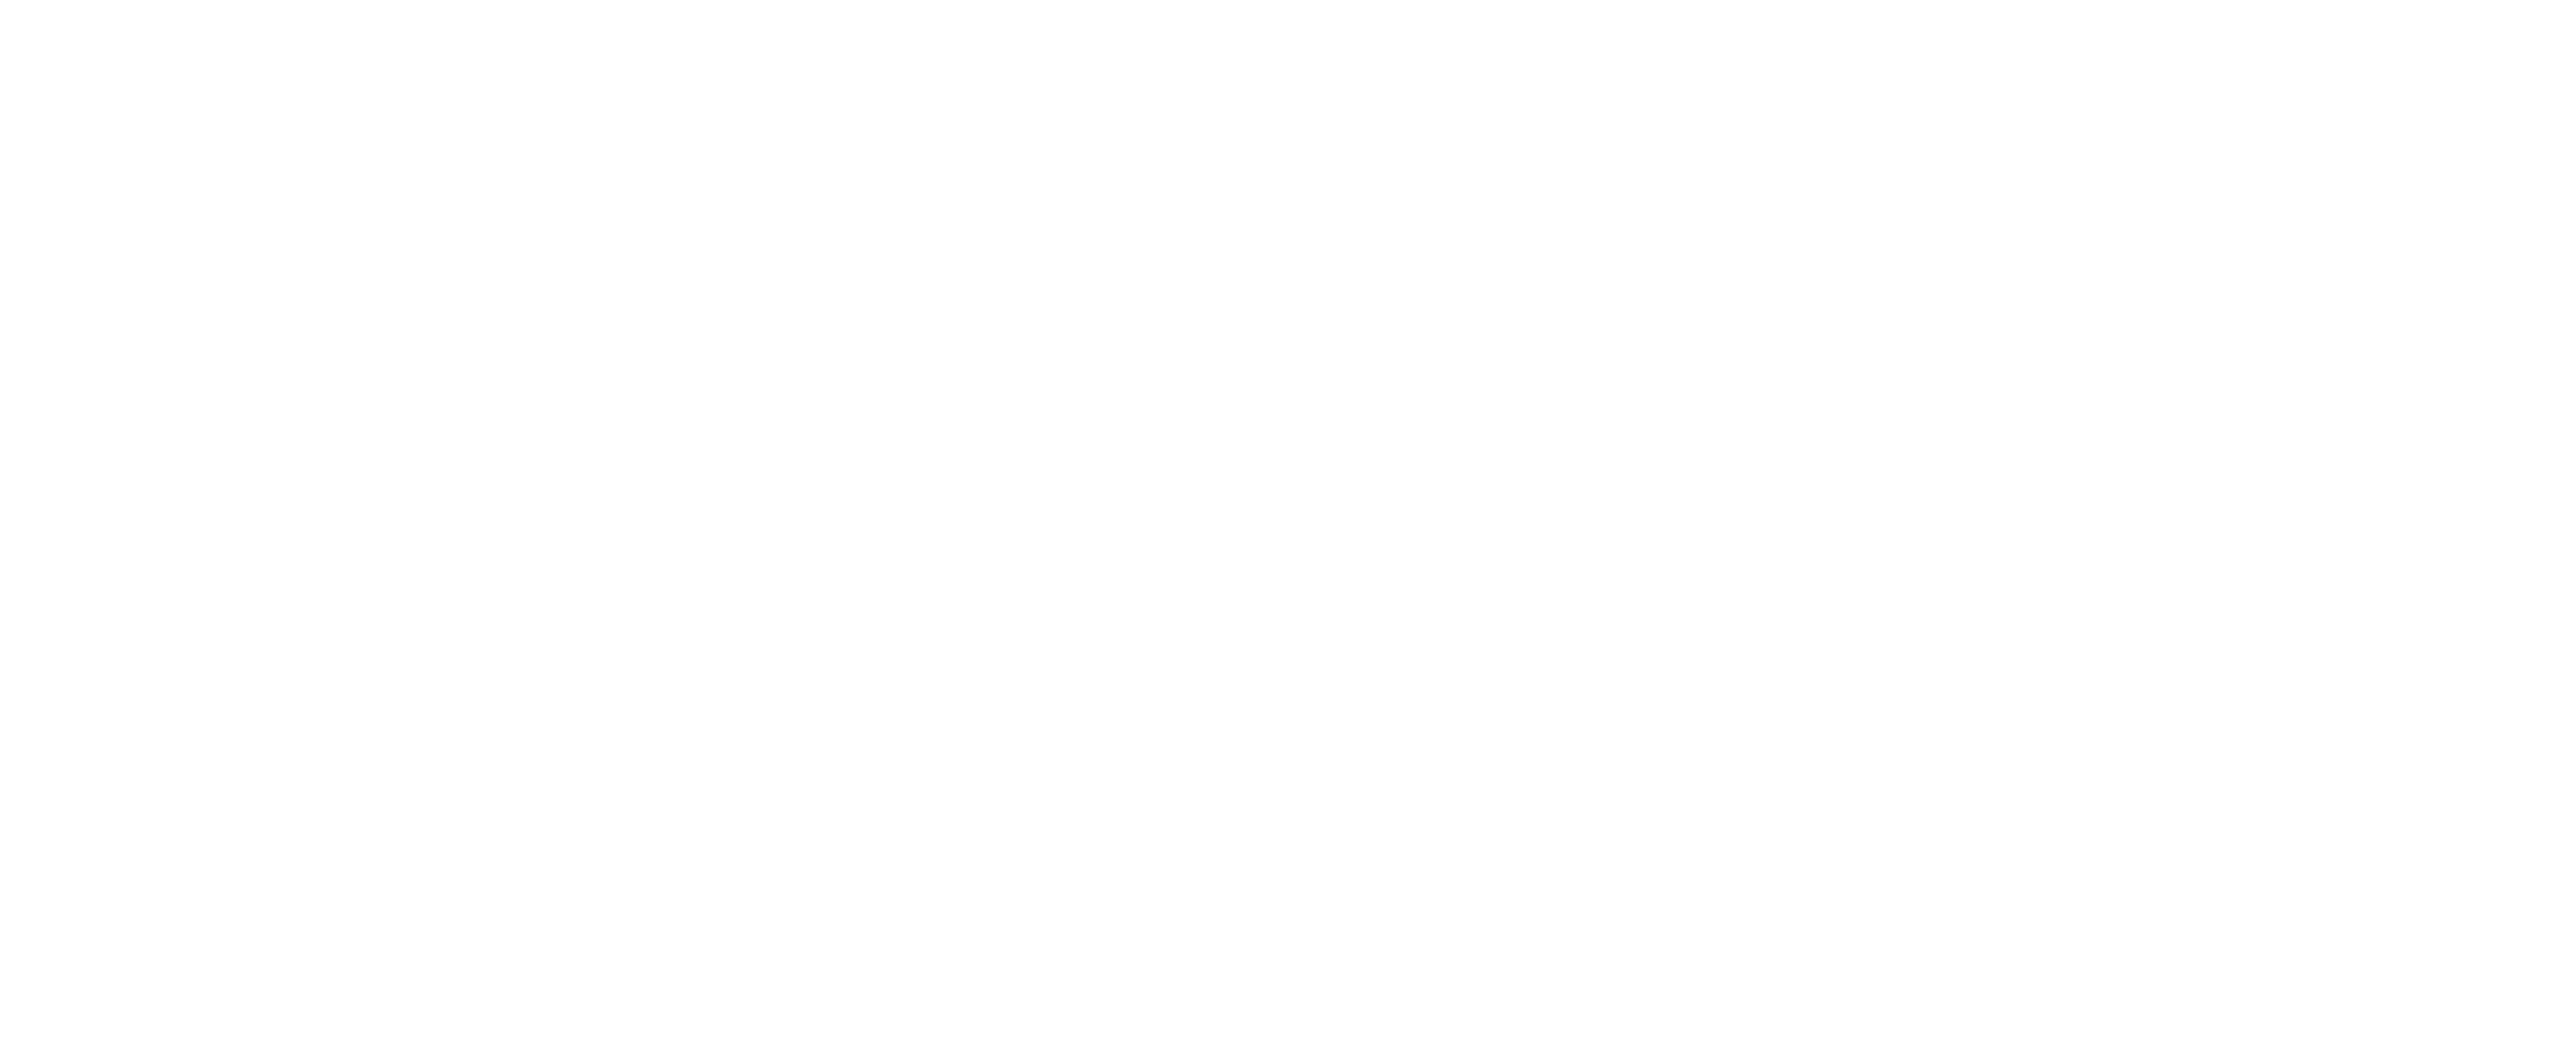 Leasehold Valuations in Uk